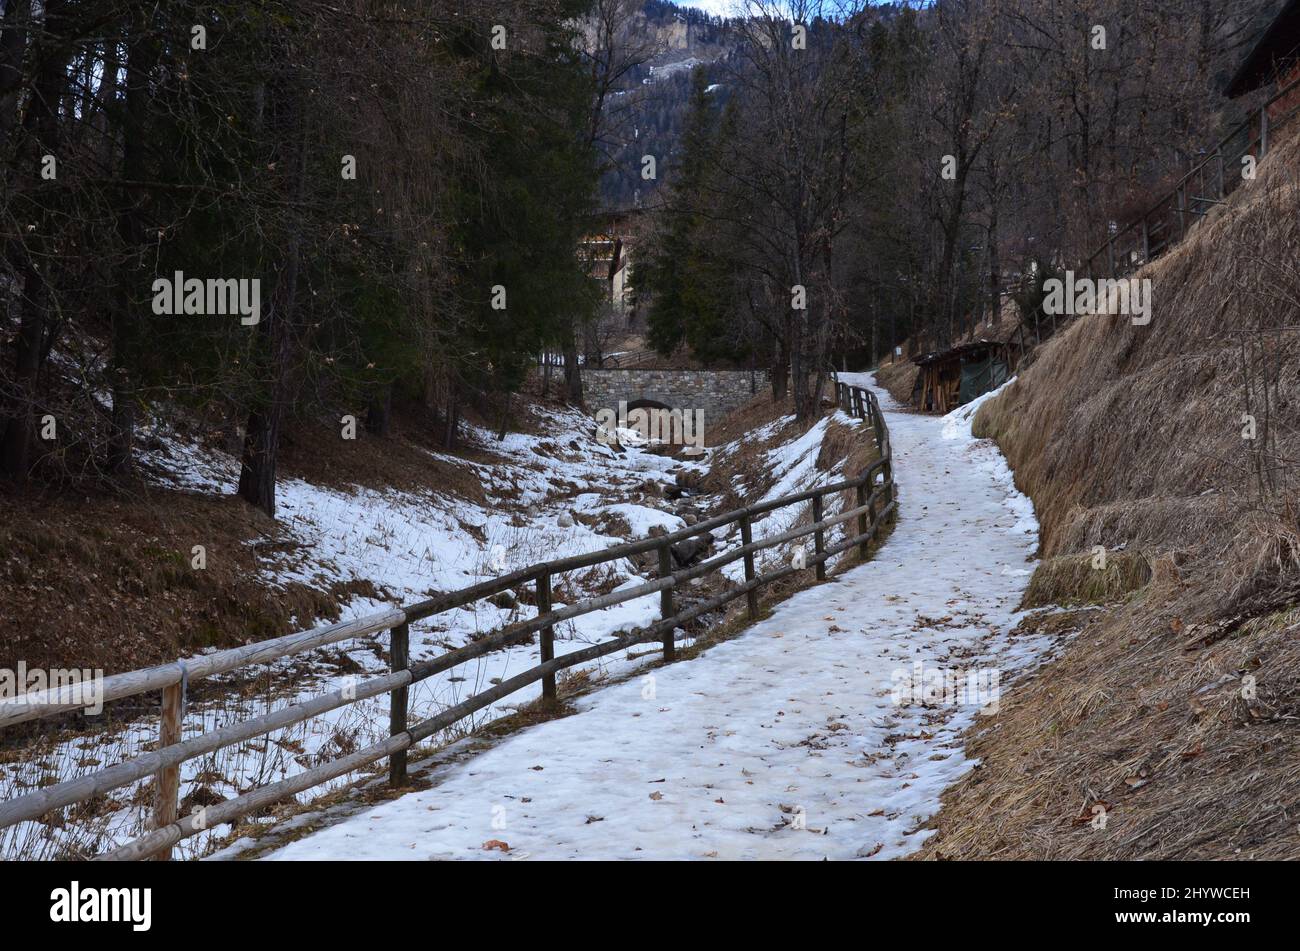 Photos of the snowcapped Dolomites during a winter trip and the small villages in the mountain valleys on a sunny, cold day Stock Photo